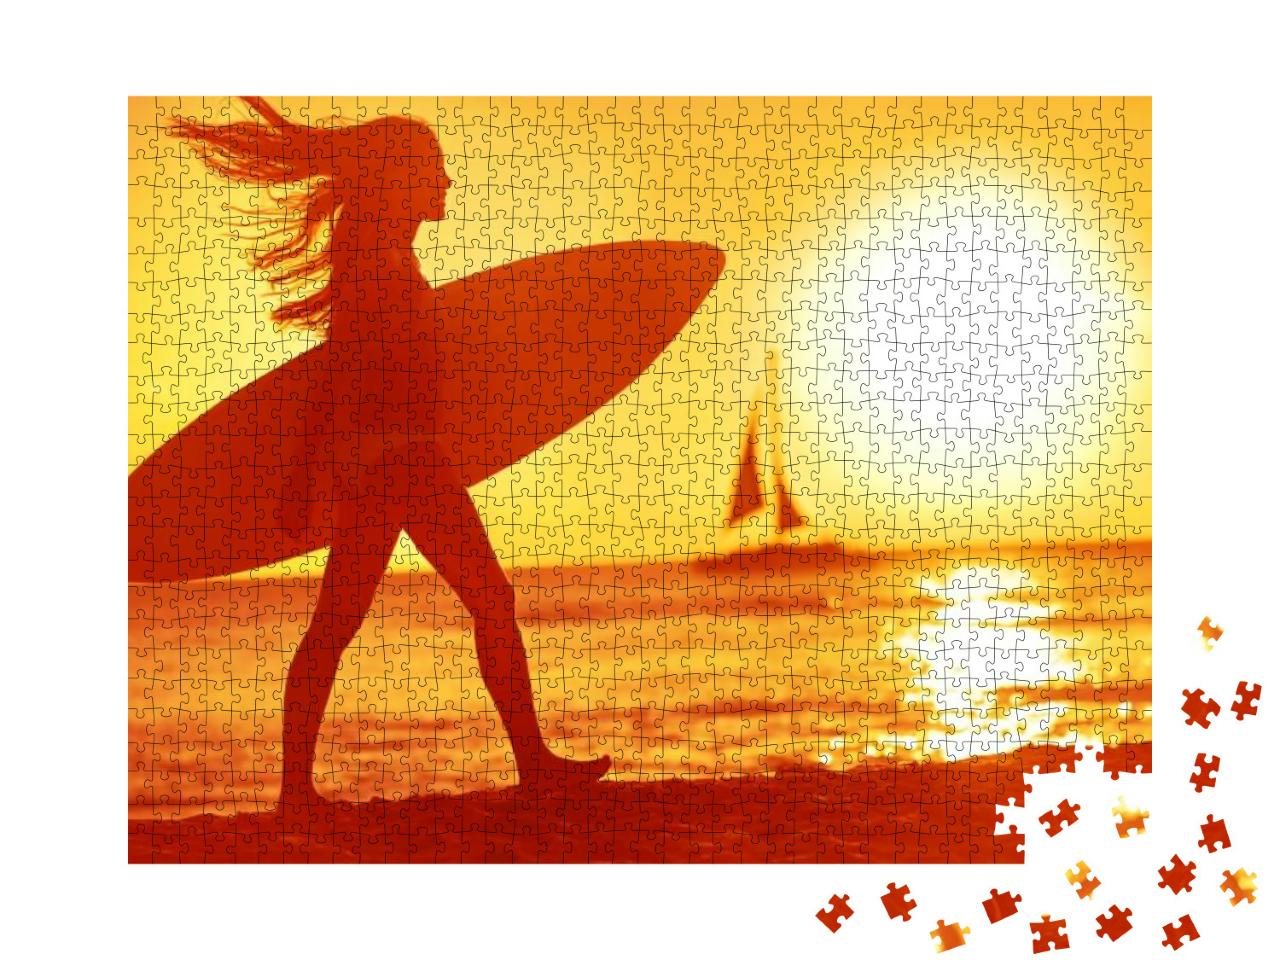 Surfing Surfer Woman Babe Beach Fun At Sunset. Girl Walki... Jigsaw Puzzle with 1000 pieces